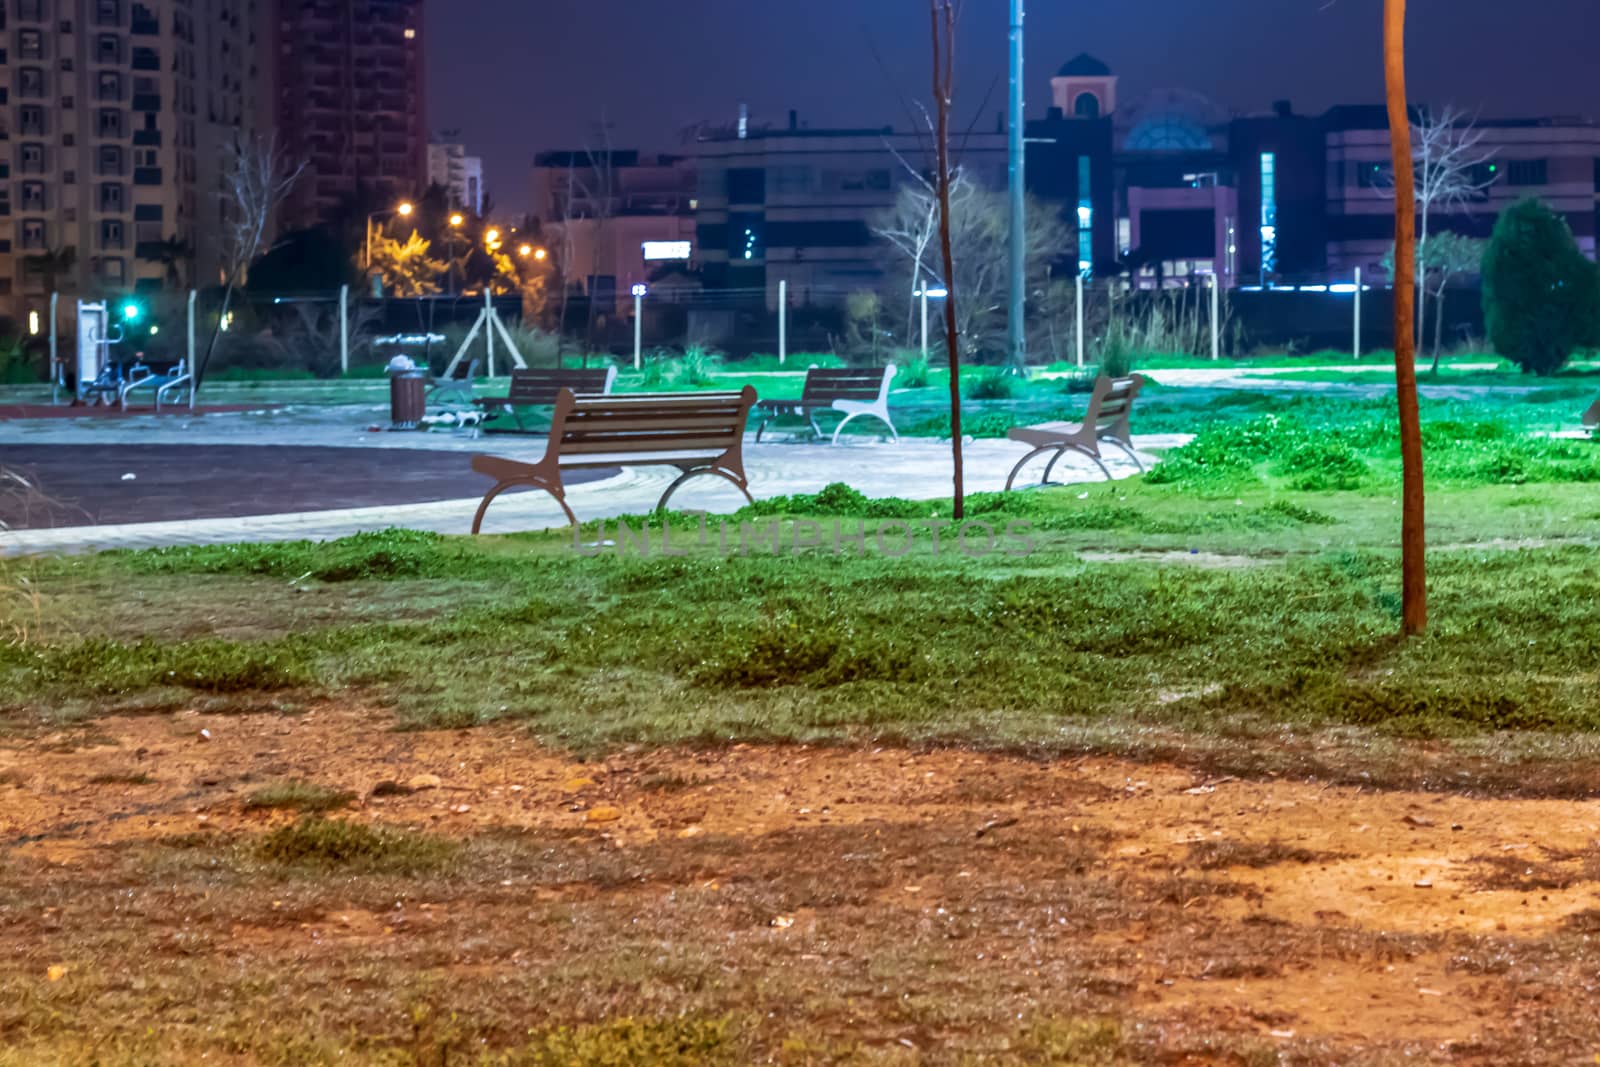 a night shoot from a park at middle of a city by Swonie